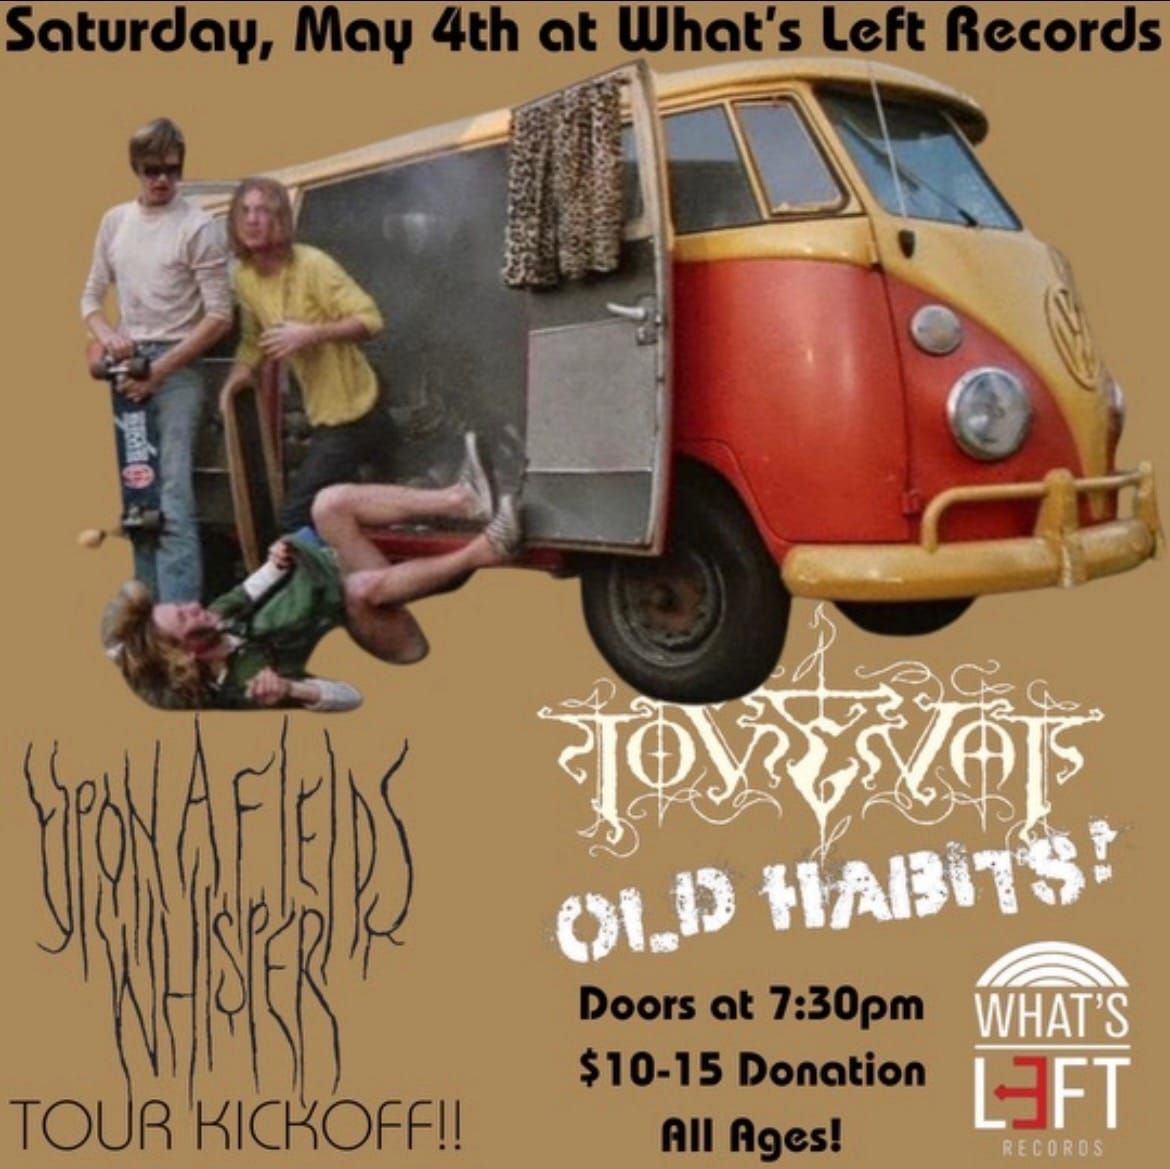 Upon a Field's Whisper TOUR KICKOFF! with Tovenaar and Old Habits,